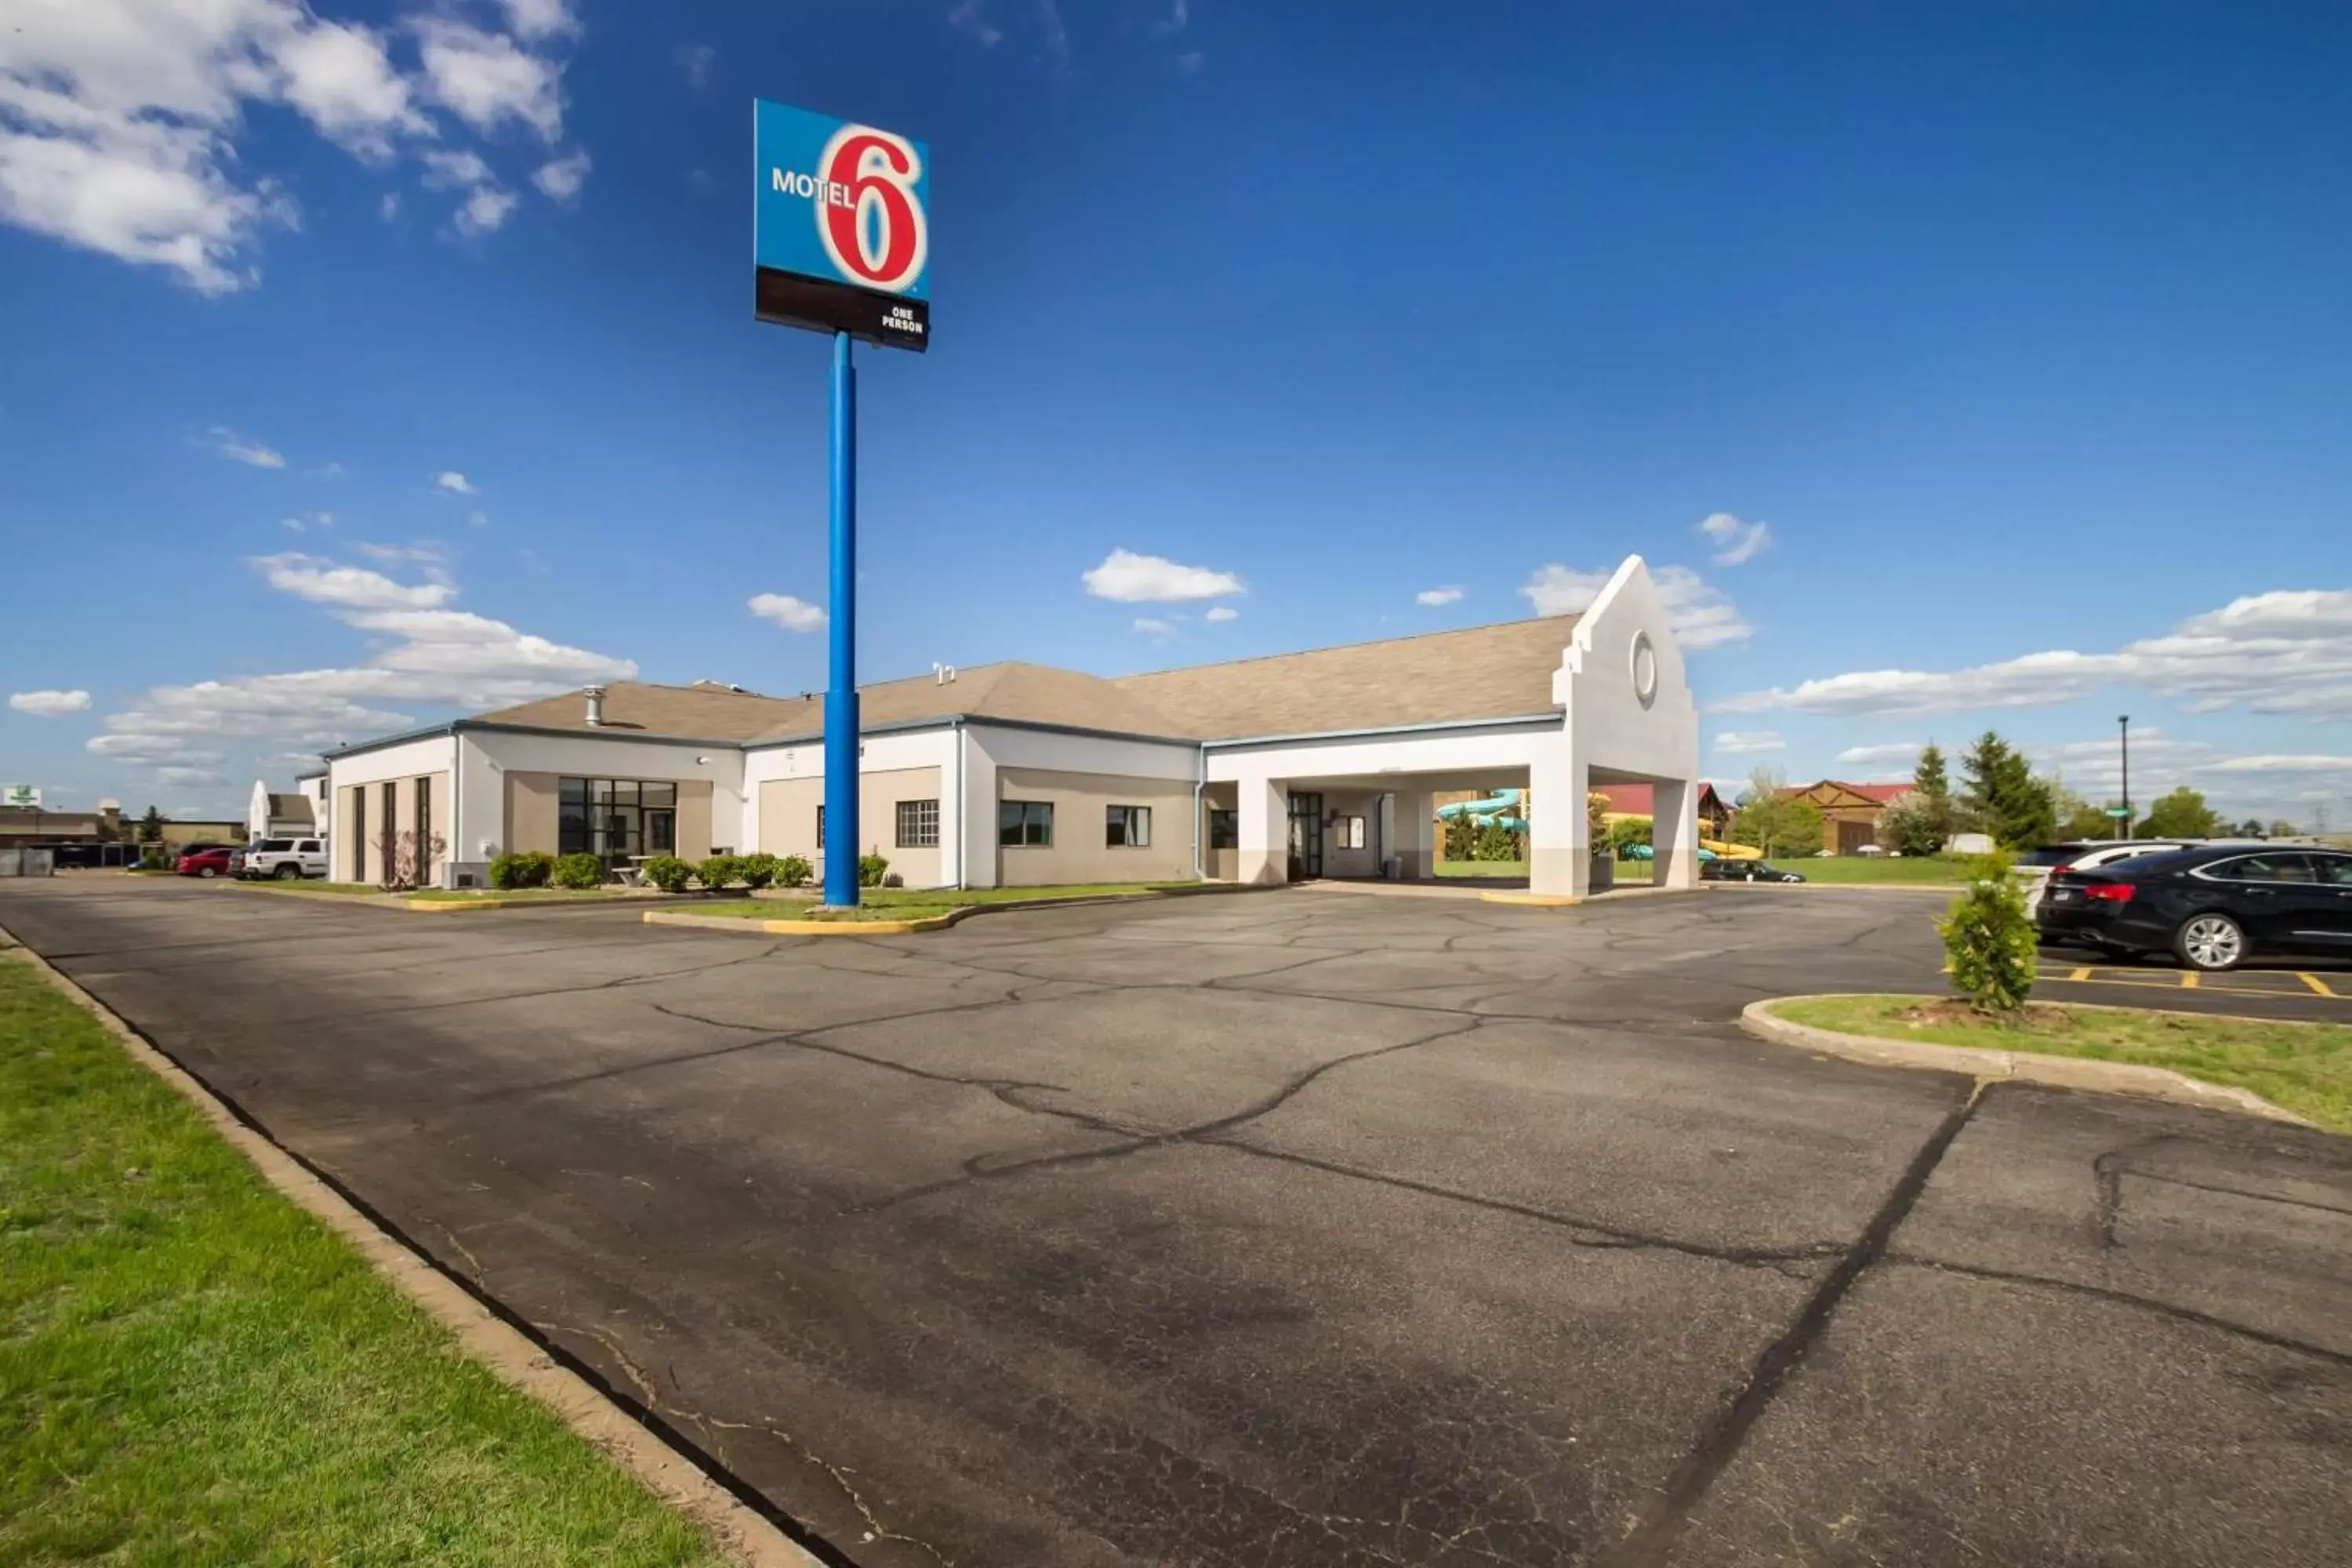 Property Building in Motel 6-Rothschild, WI